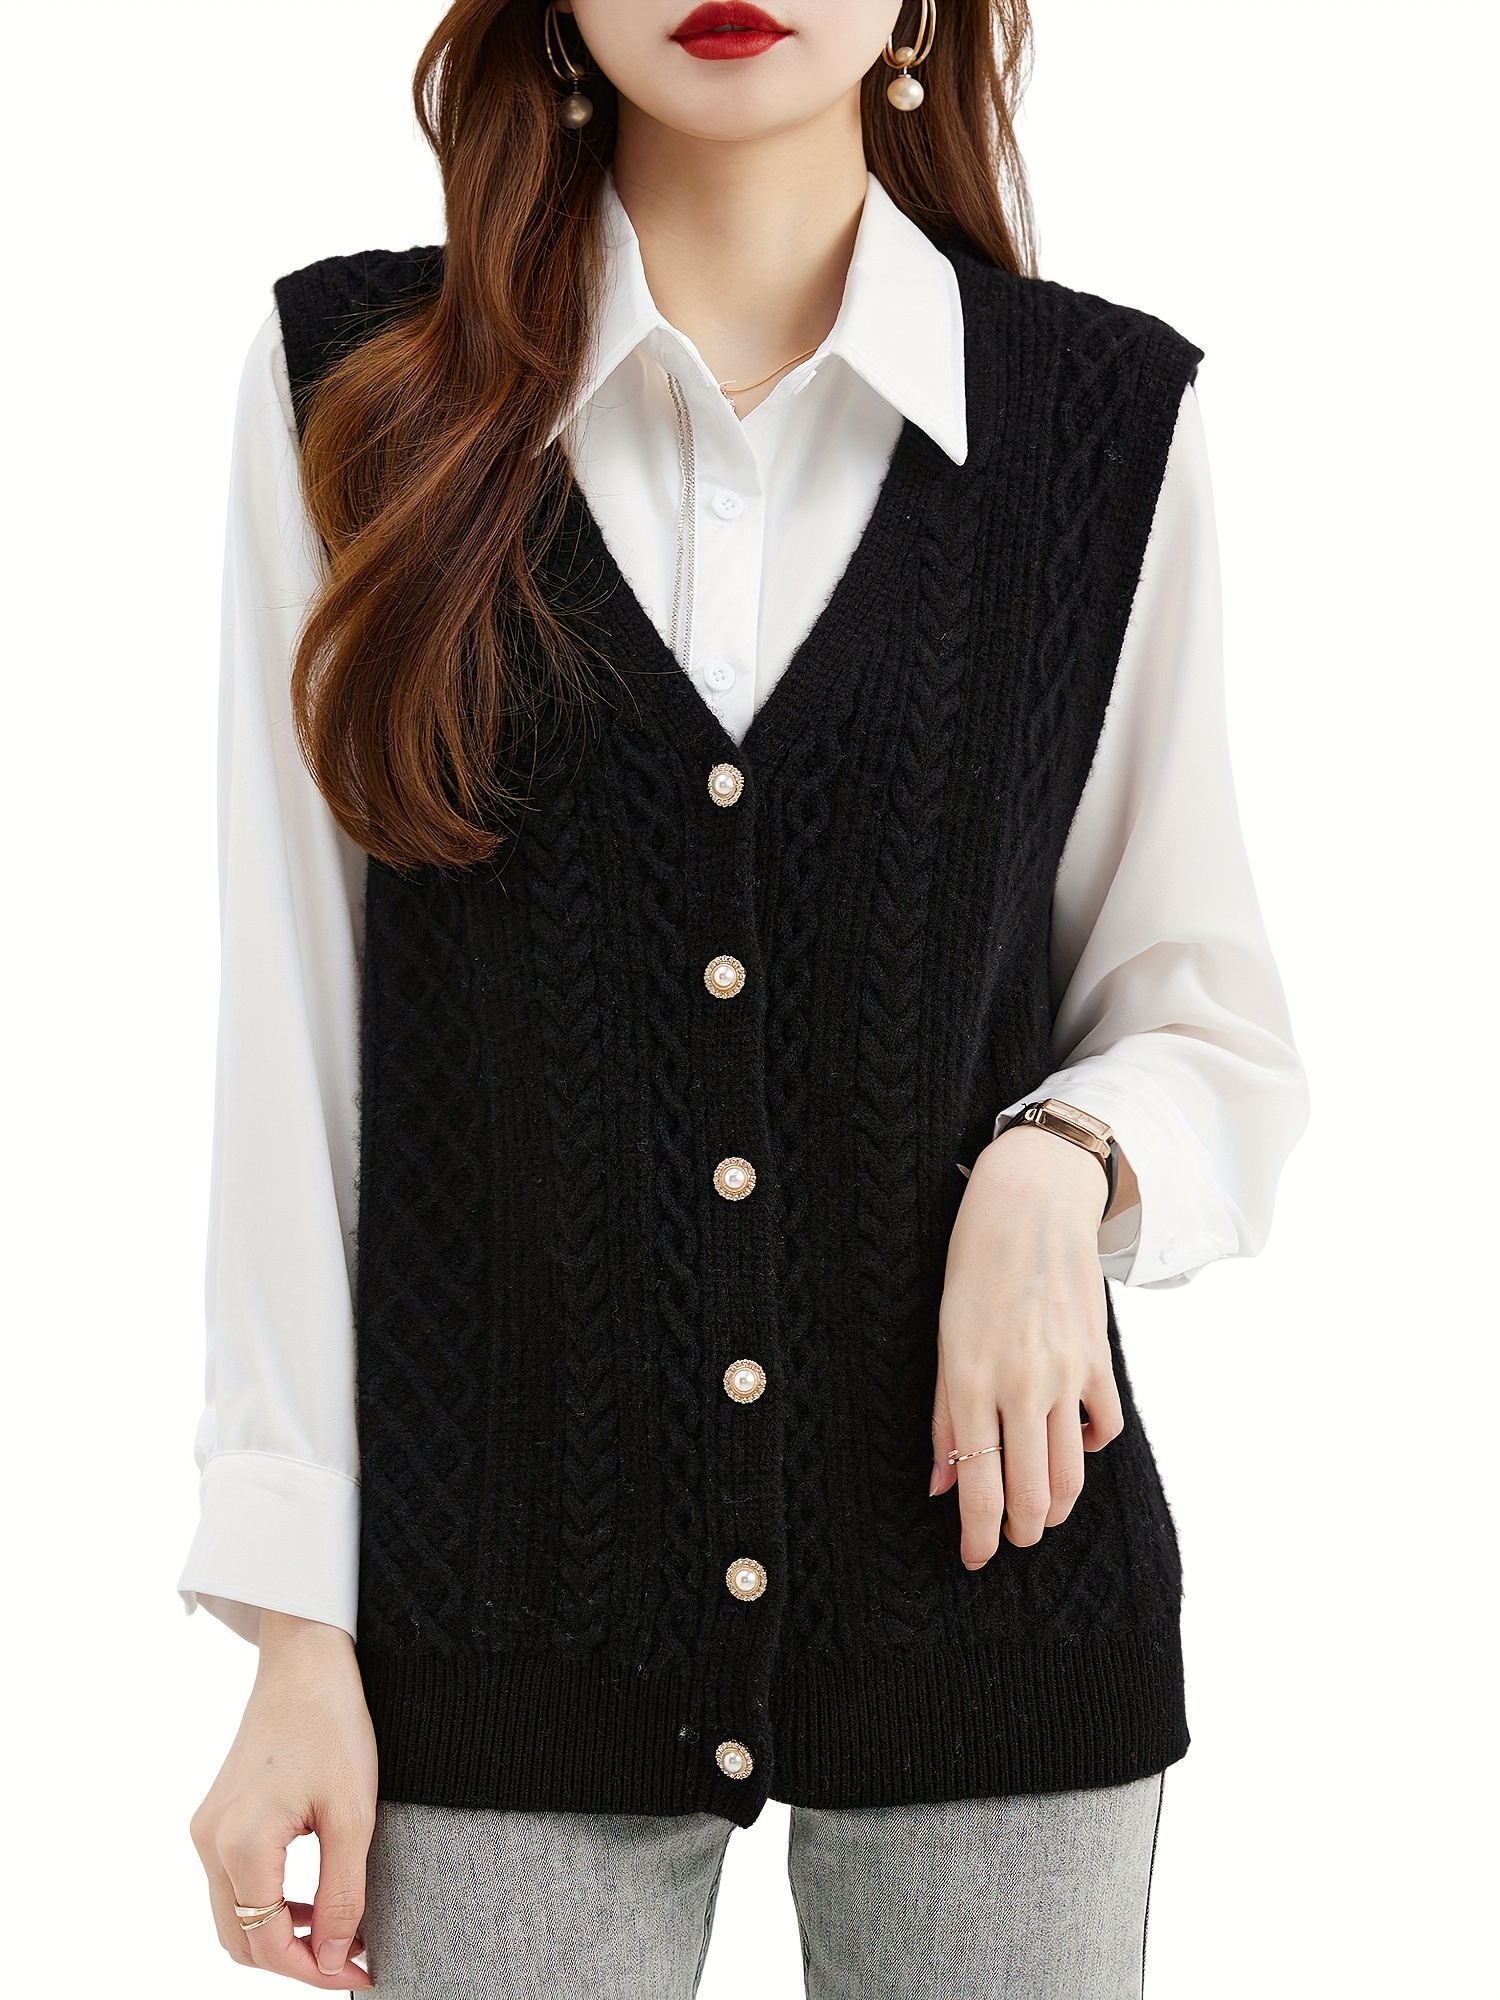 Sweater Vest Wool Vest Women's Clothing Knitted Womens Top 